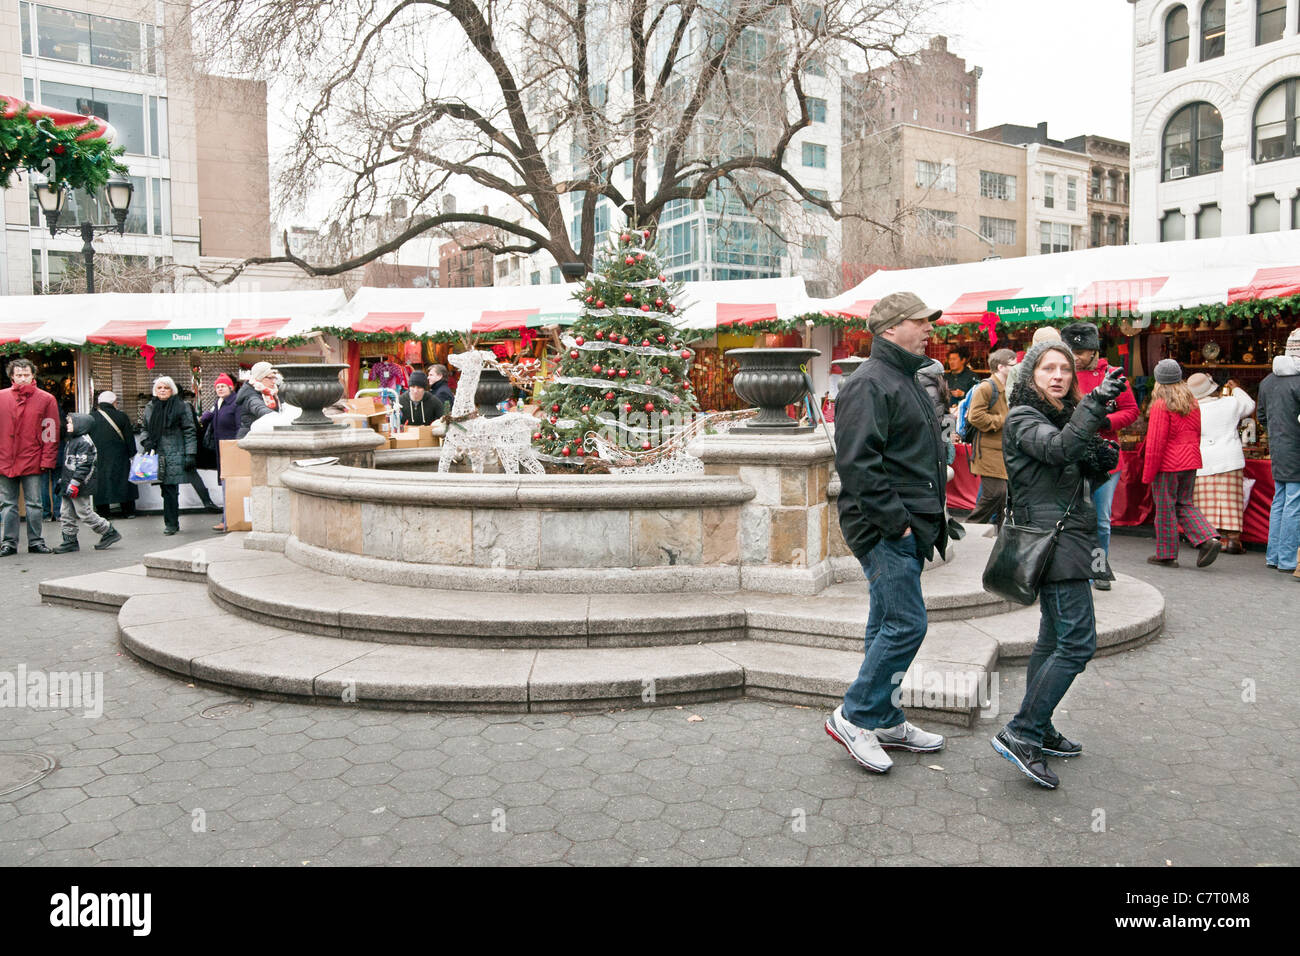 Christmas market kiosks shoppers surround Union Square fountain decorated with tree & white wire openwork reindeer & sleigh Stock Photo